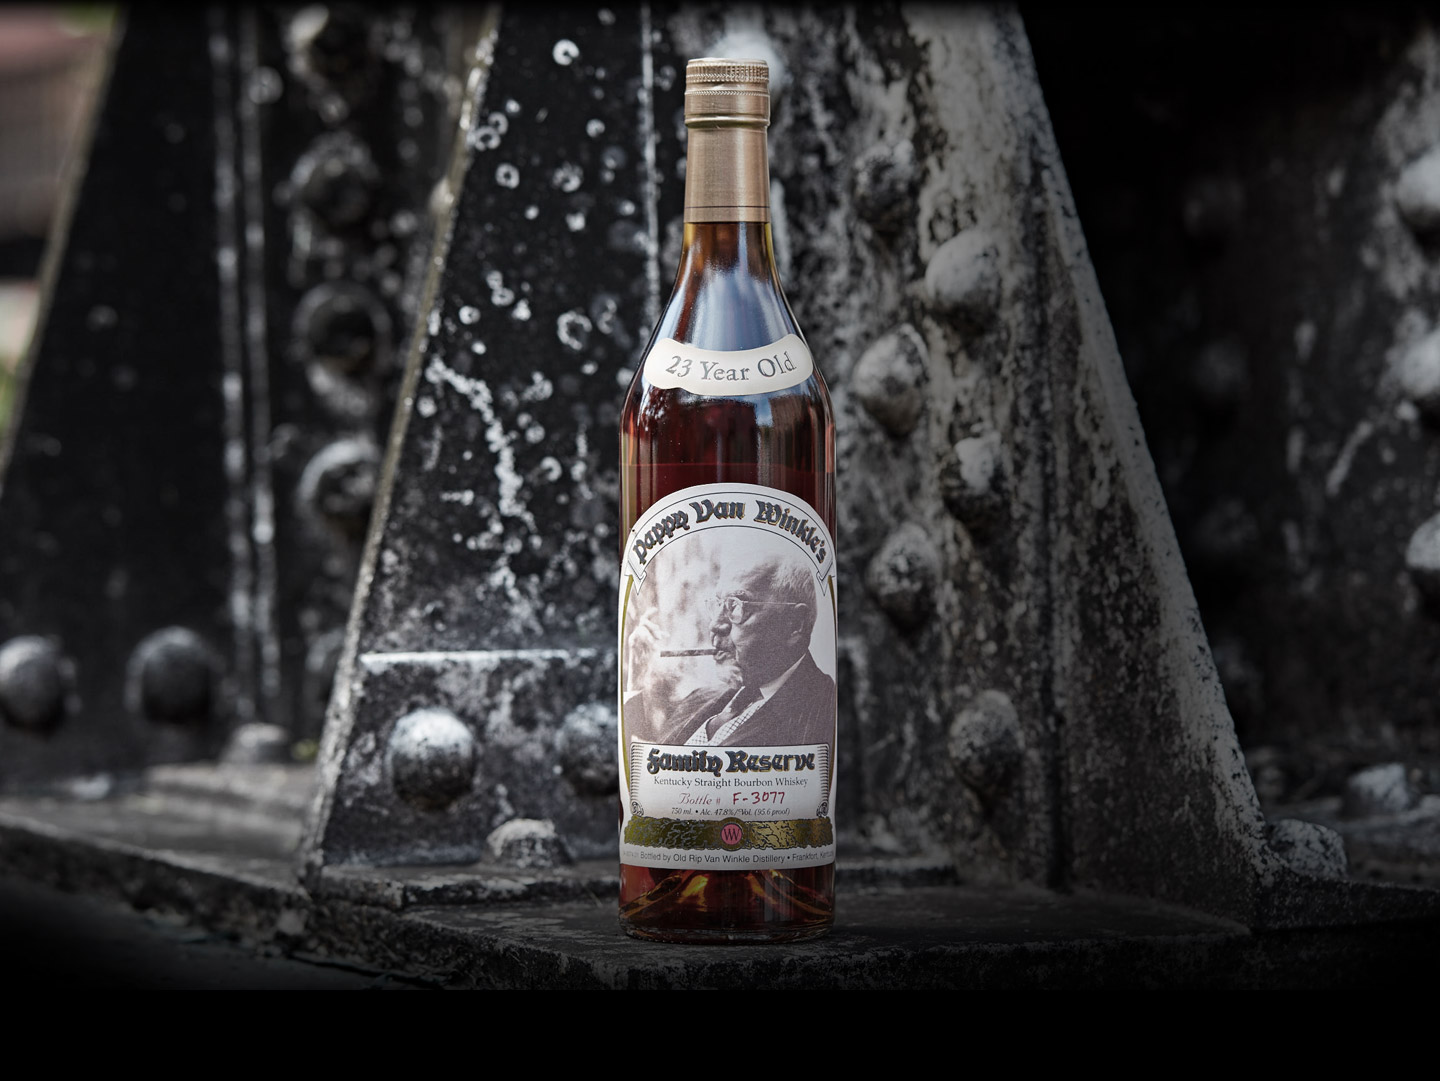 Pappy Van Winkle’s Family Reserve 23 Year Old: The Crown Jewel of Bourbon Whiskey